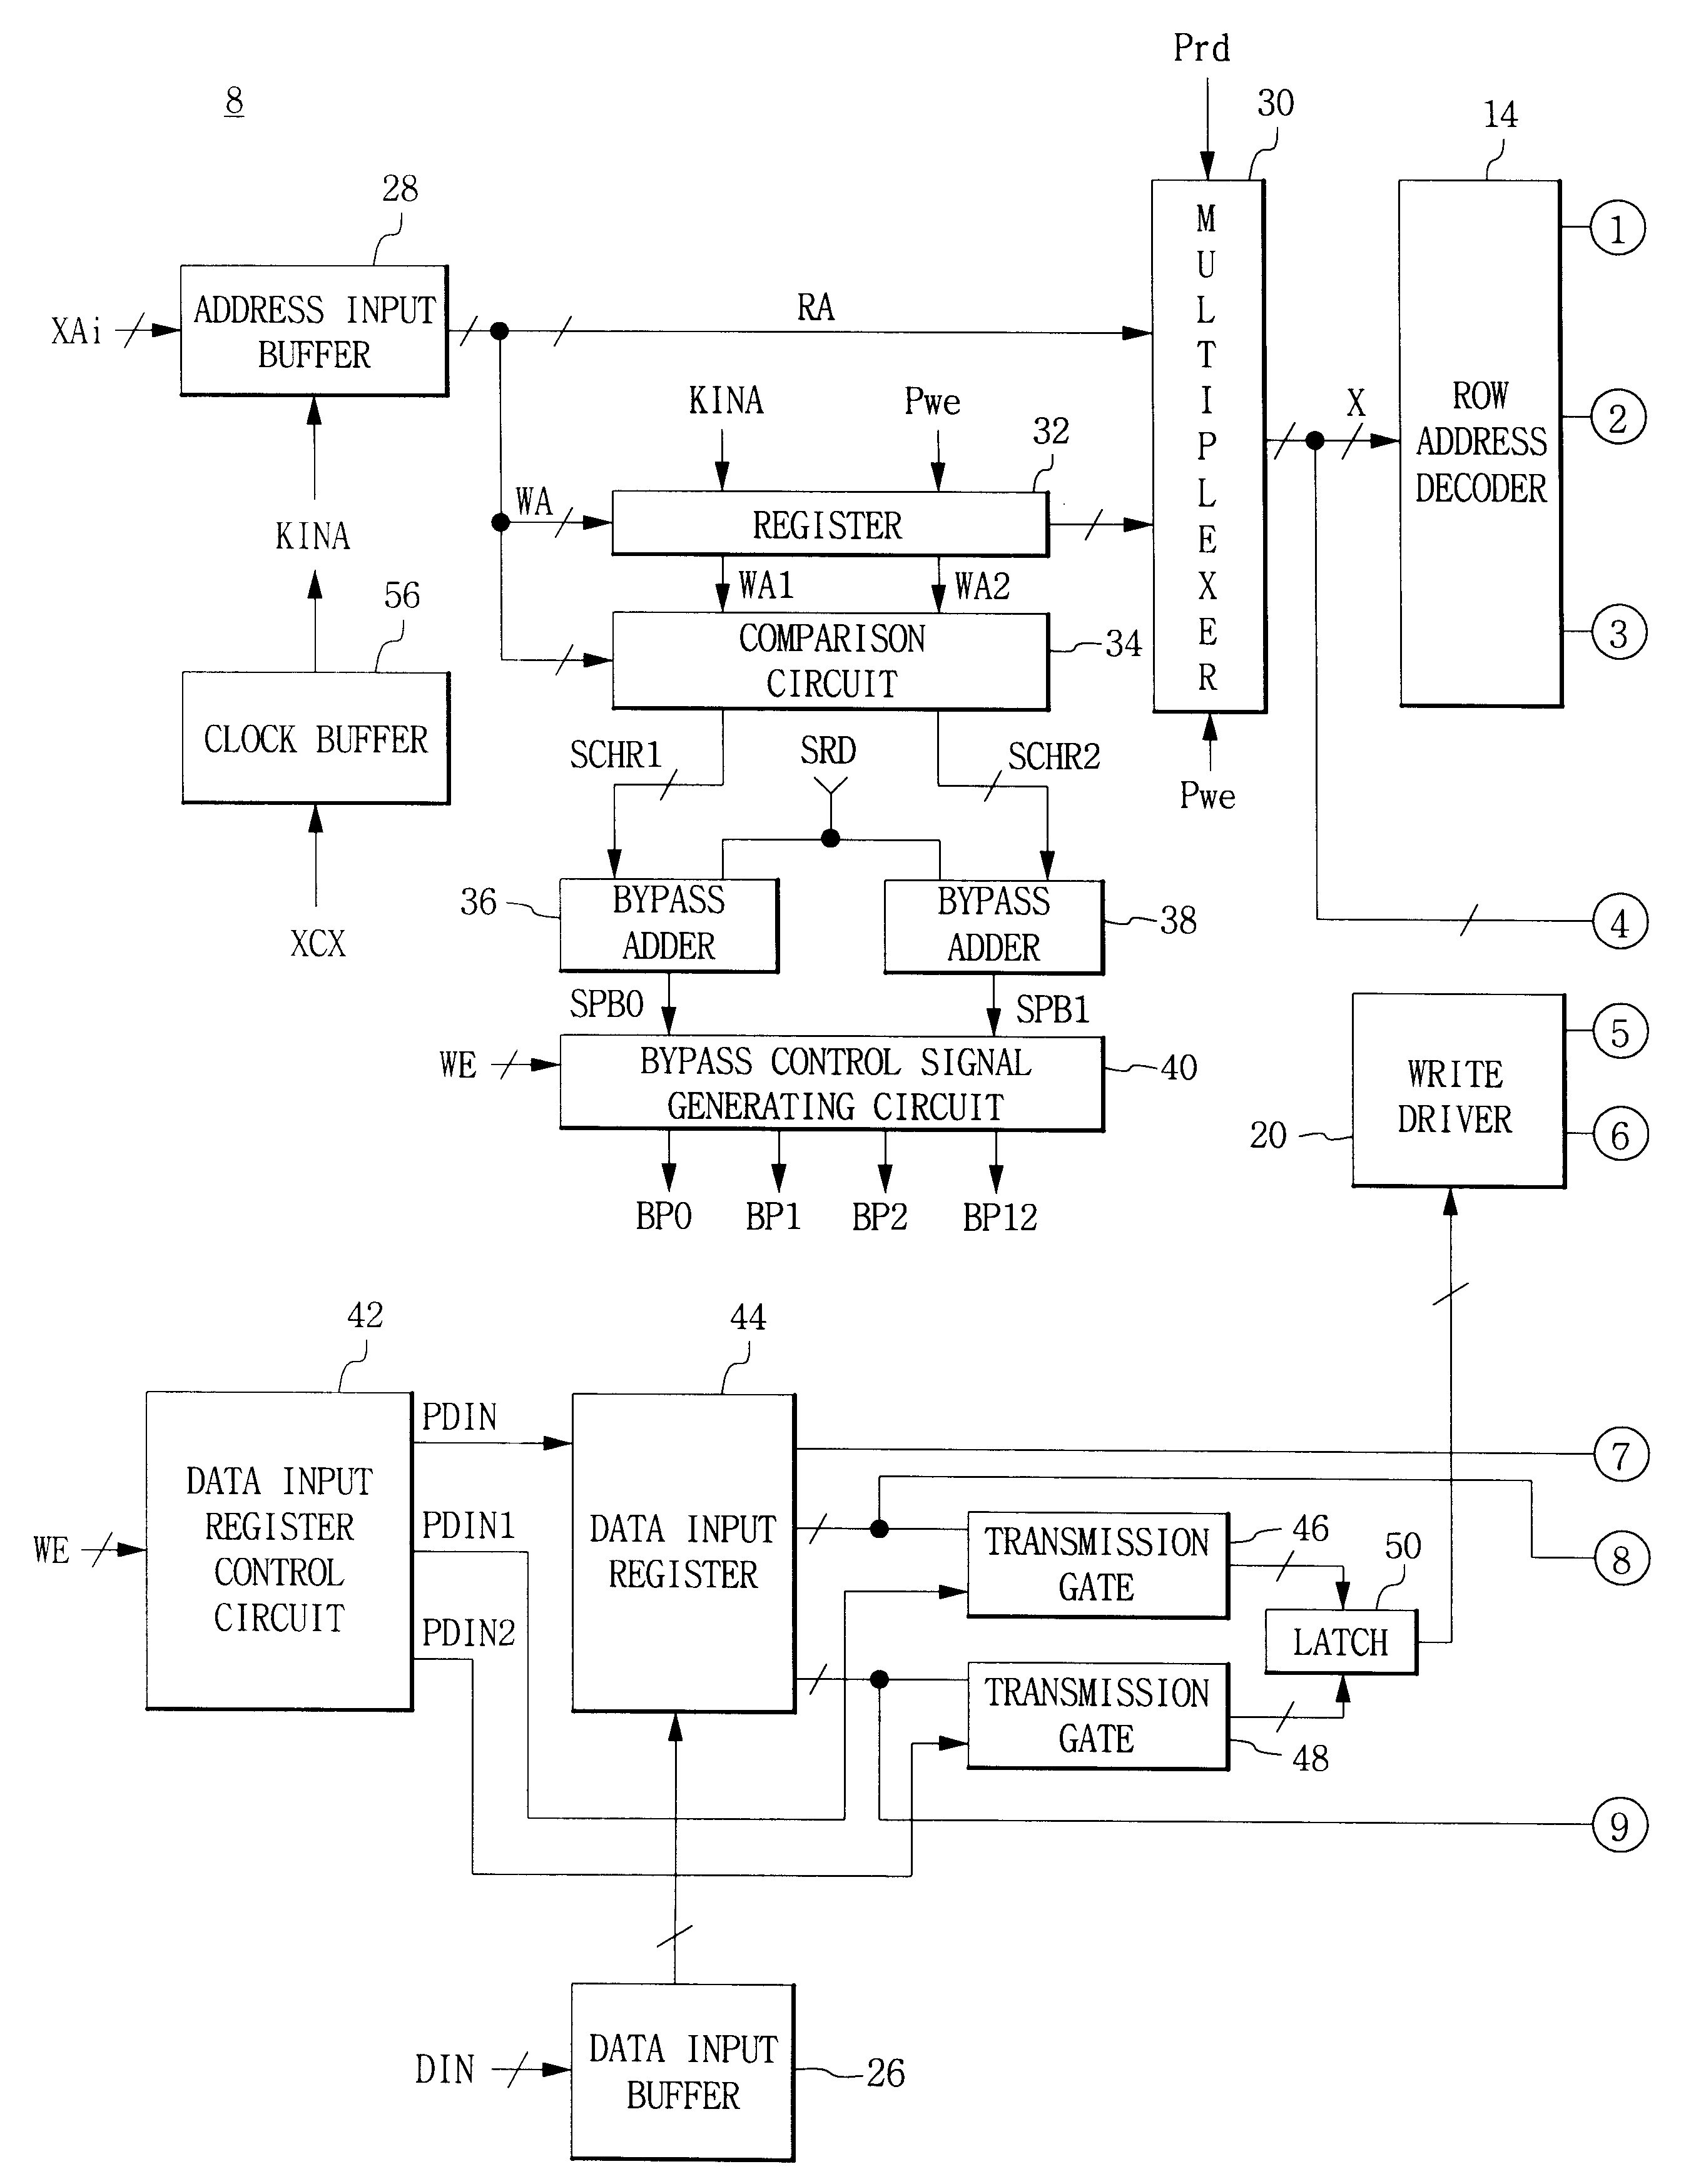 Late-write type semiconductor memory device with multi-channel data output multiplexer